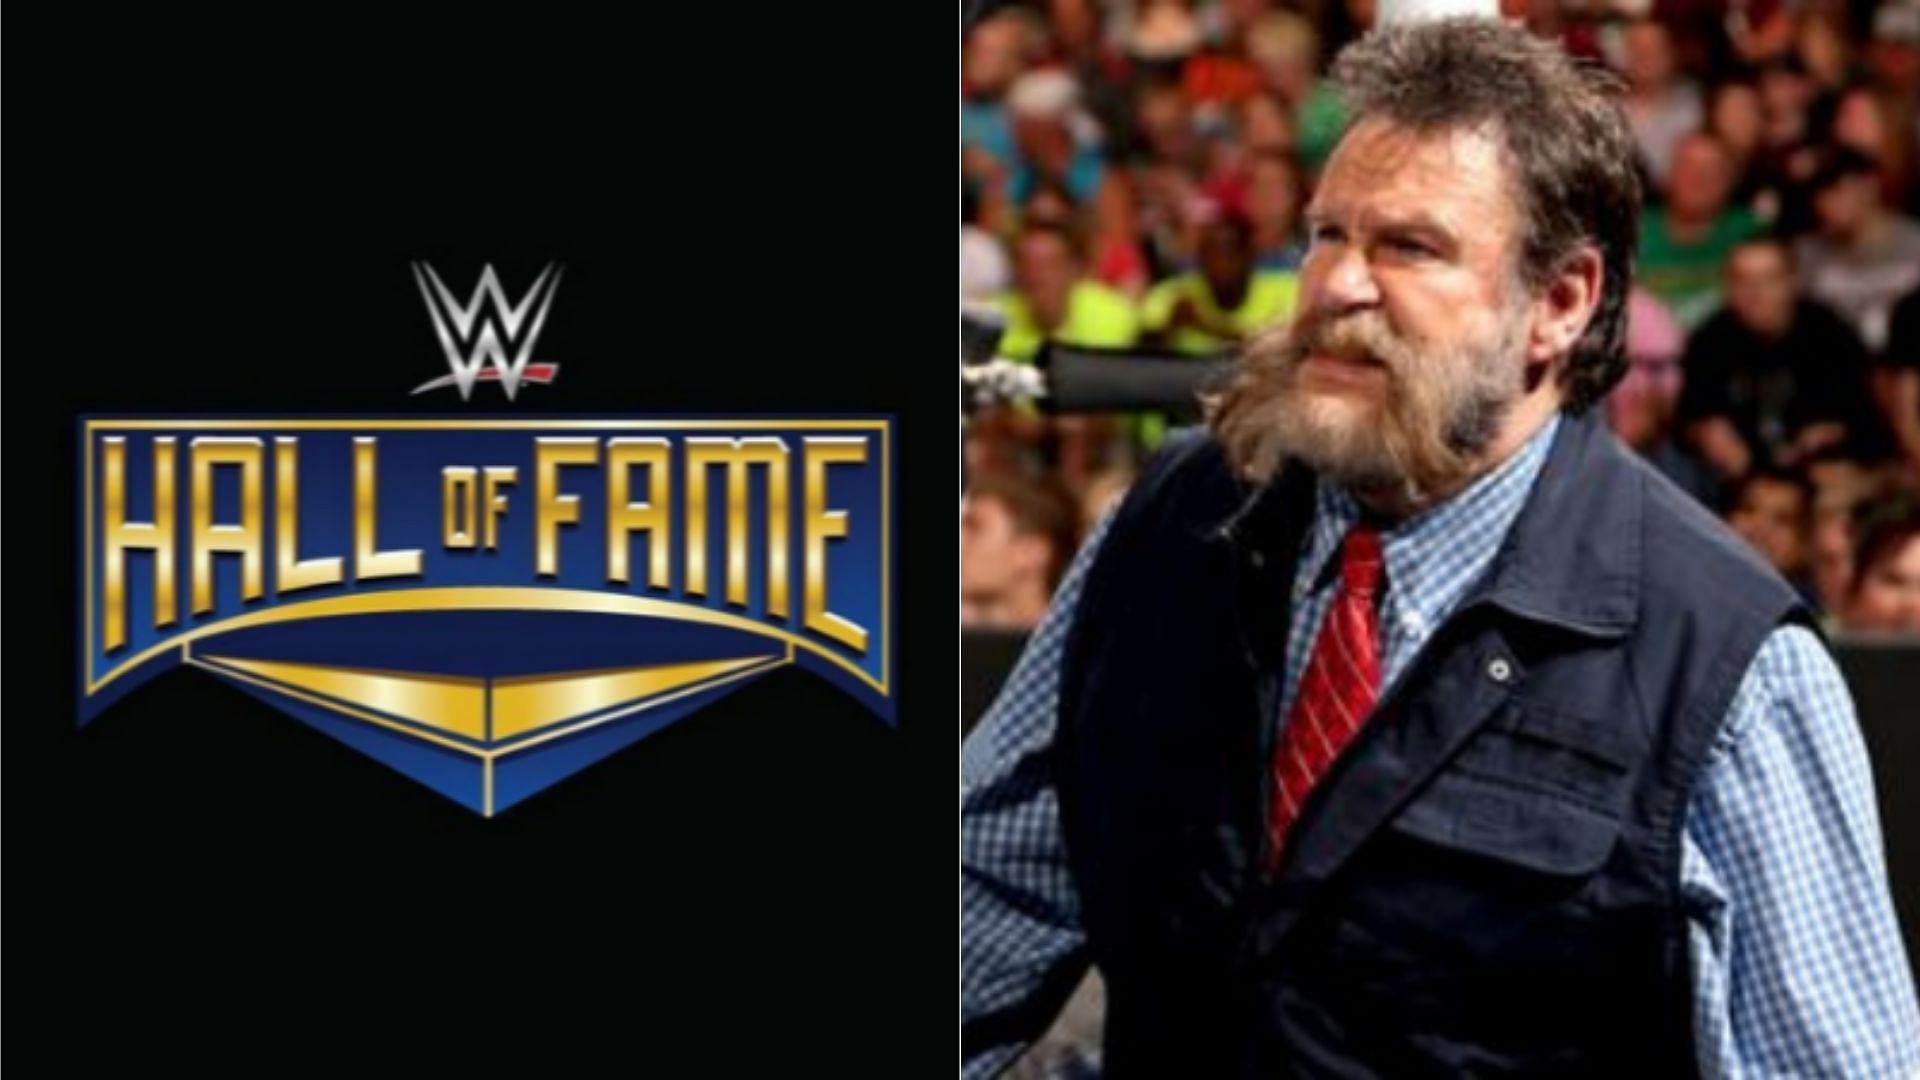 Dutch Mantell performed as Zeb Colter in WWE.